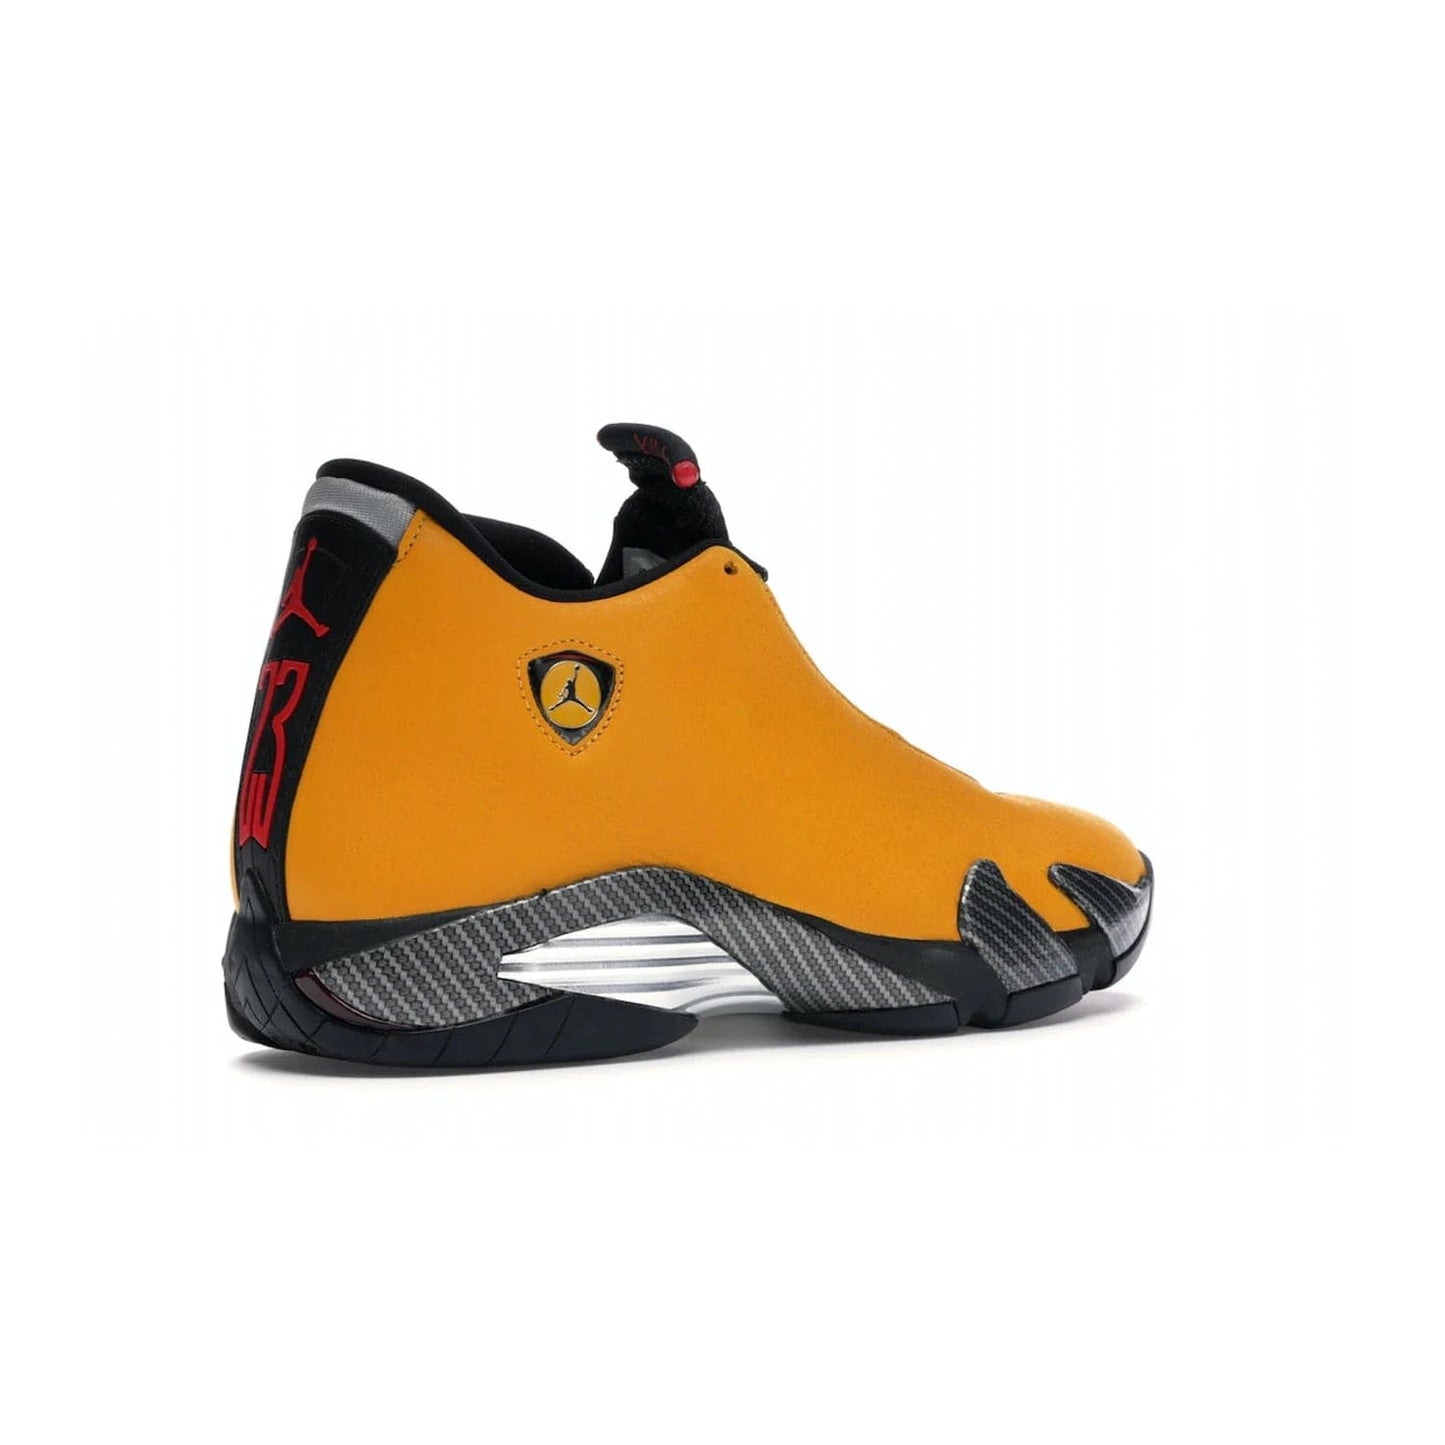 Jordan 14 Retro University Gold - Image 33 - Only at www.BallersClubKickz.com - Air Jordan 14 Retro University Gold: High-quality leather sneaker with Jumpman, tongue & heel logos. Zoom Air units & herringbone traction for superior comfort. University Gold outsole for stylish streetwear.